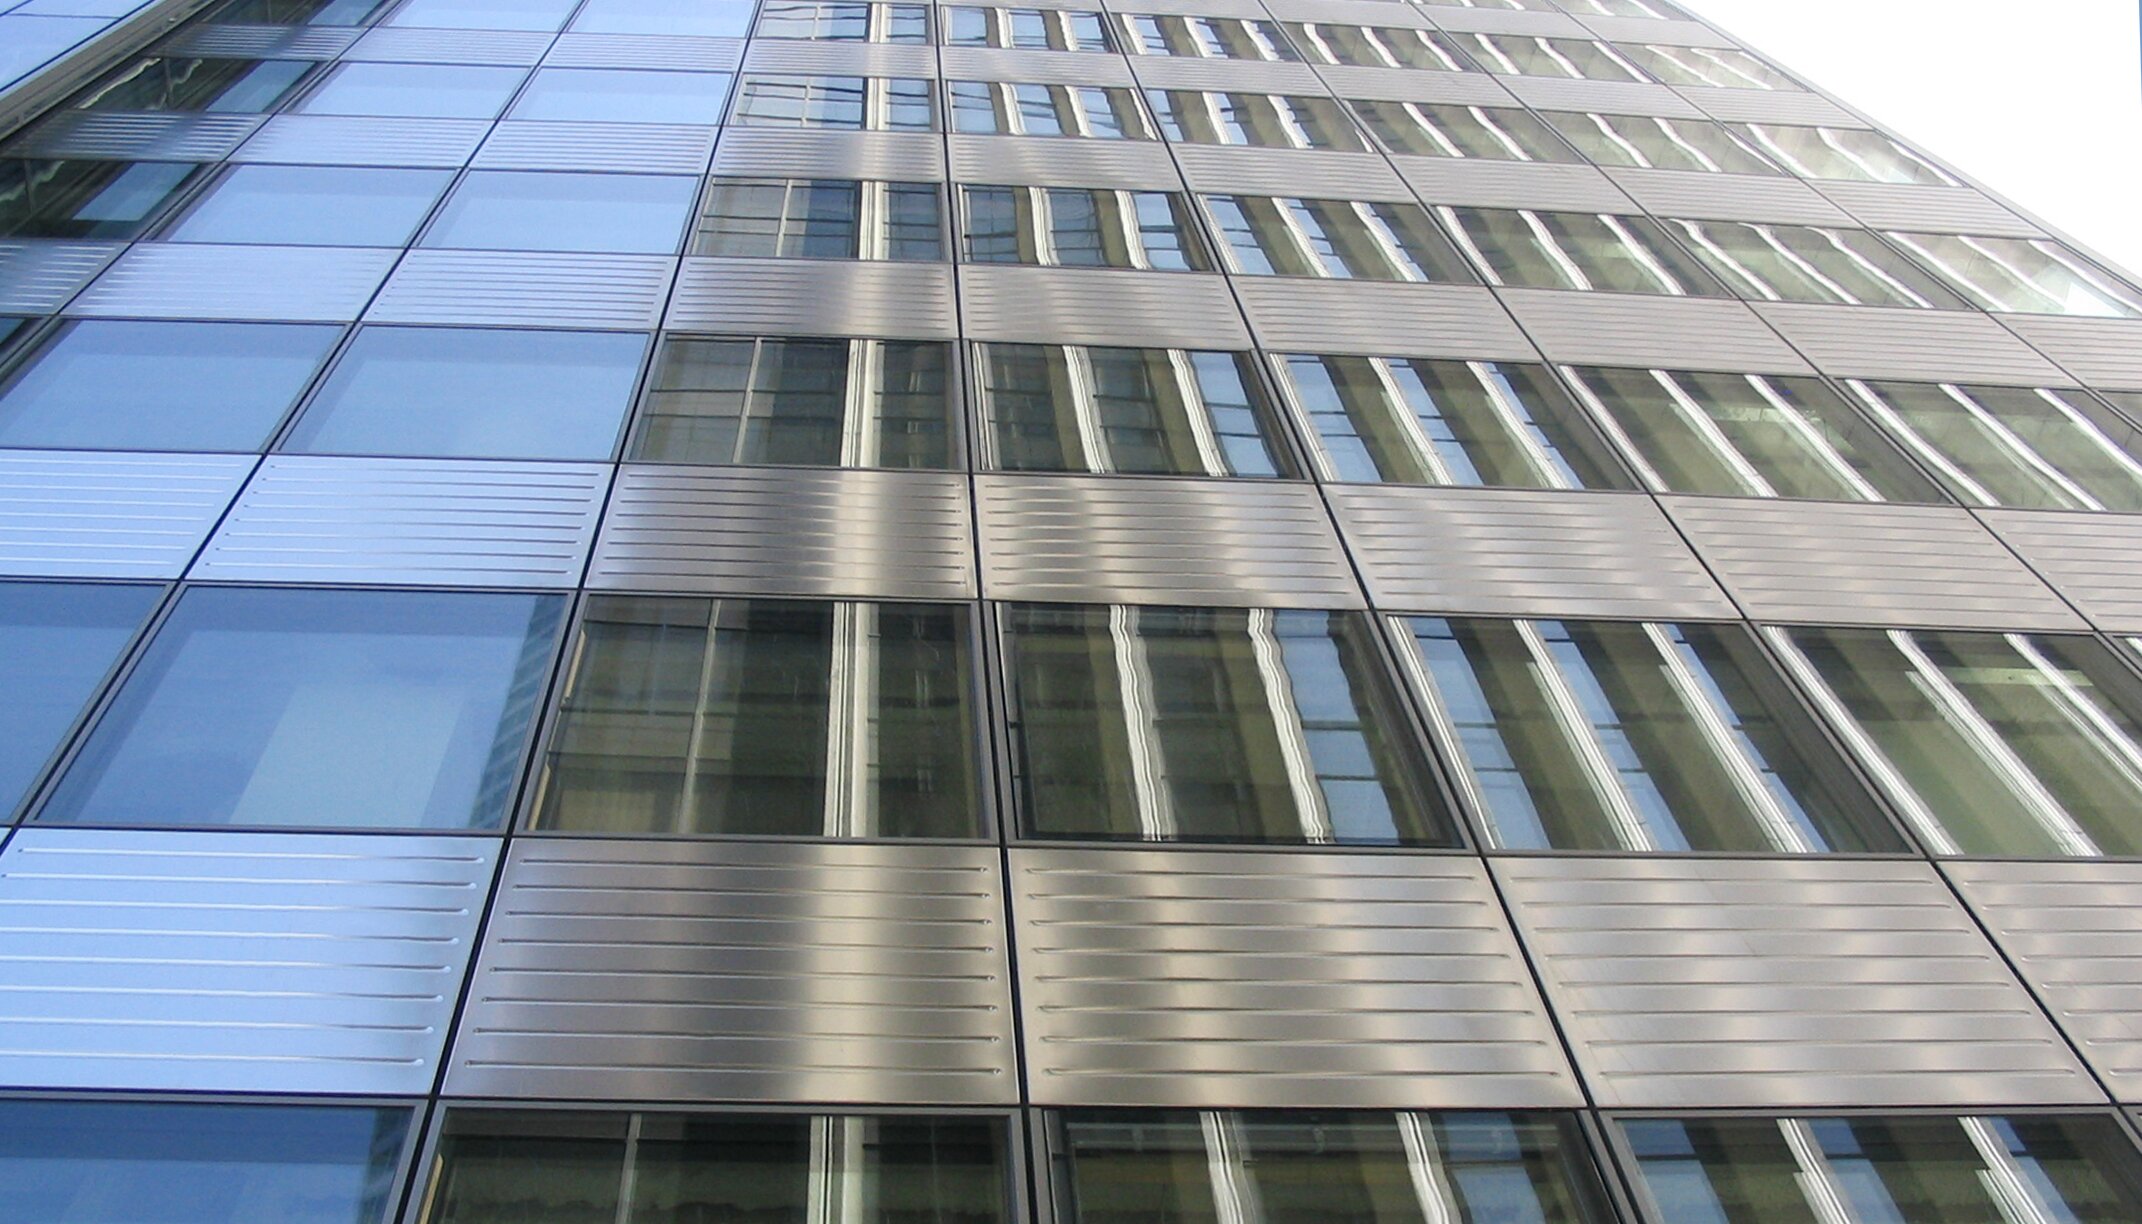 "PB12 Office Tower" back ventilated facade, stainless steel, Paris